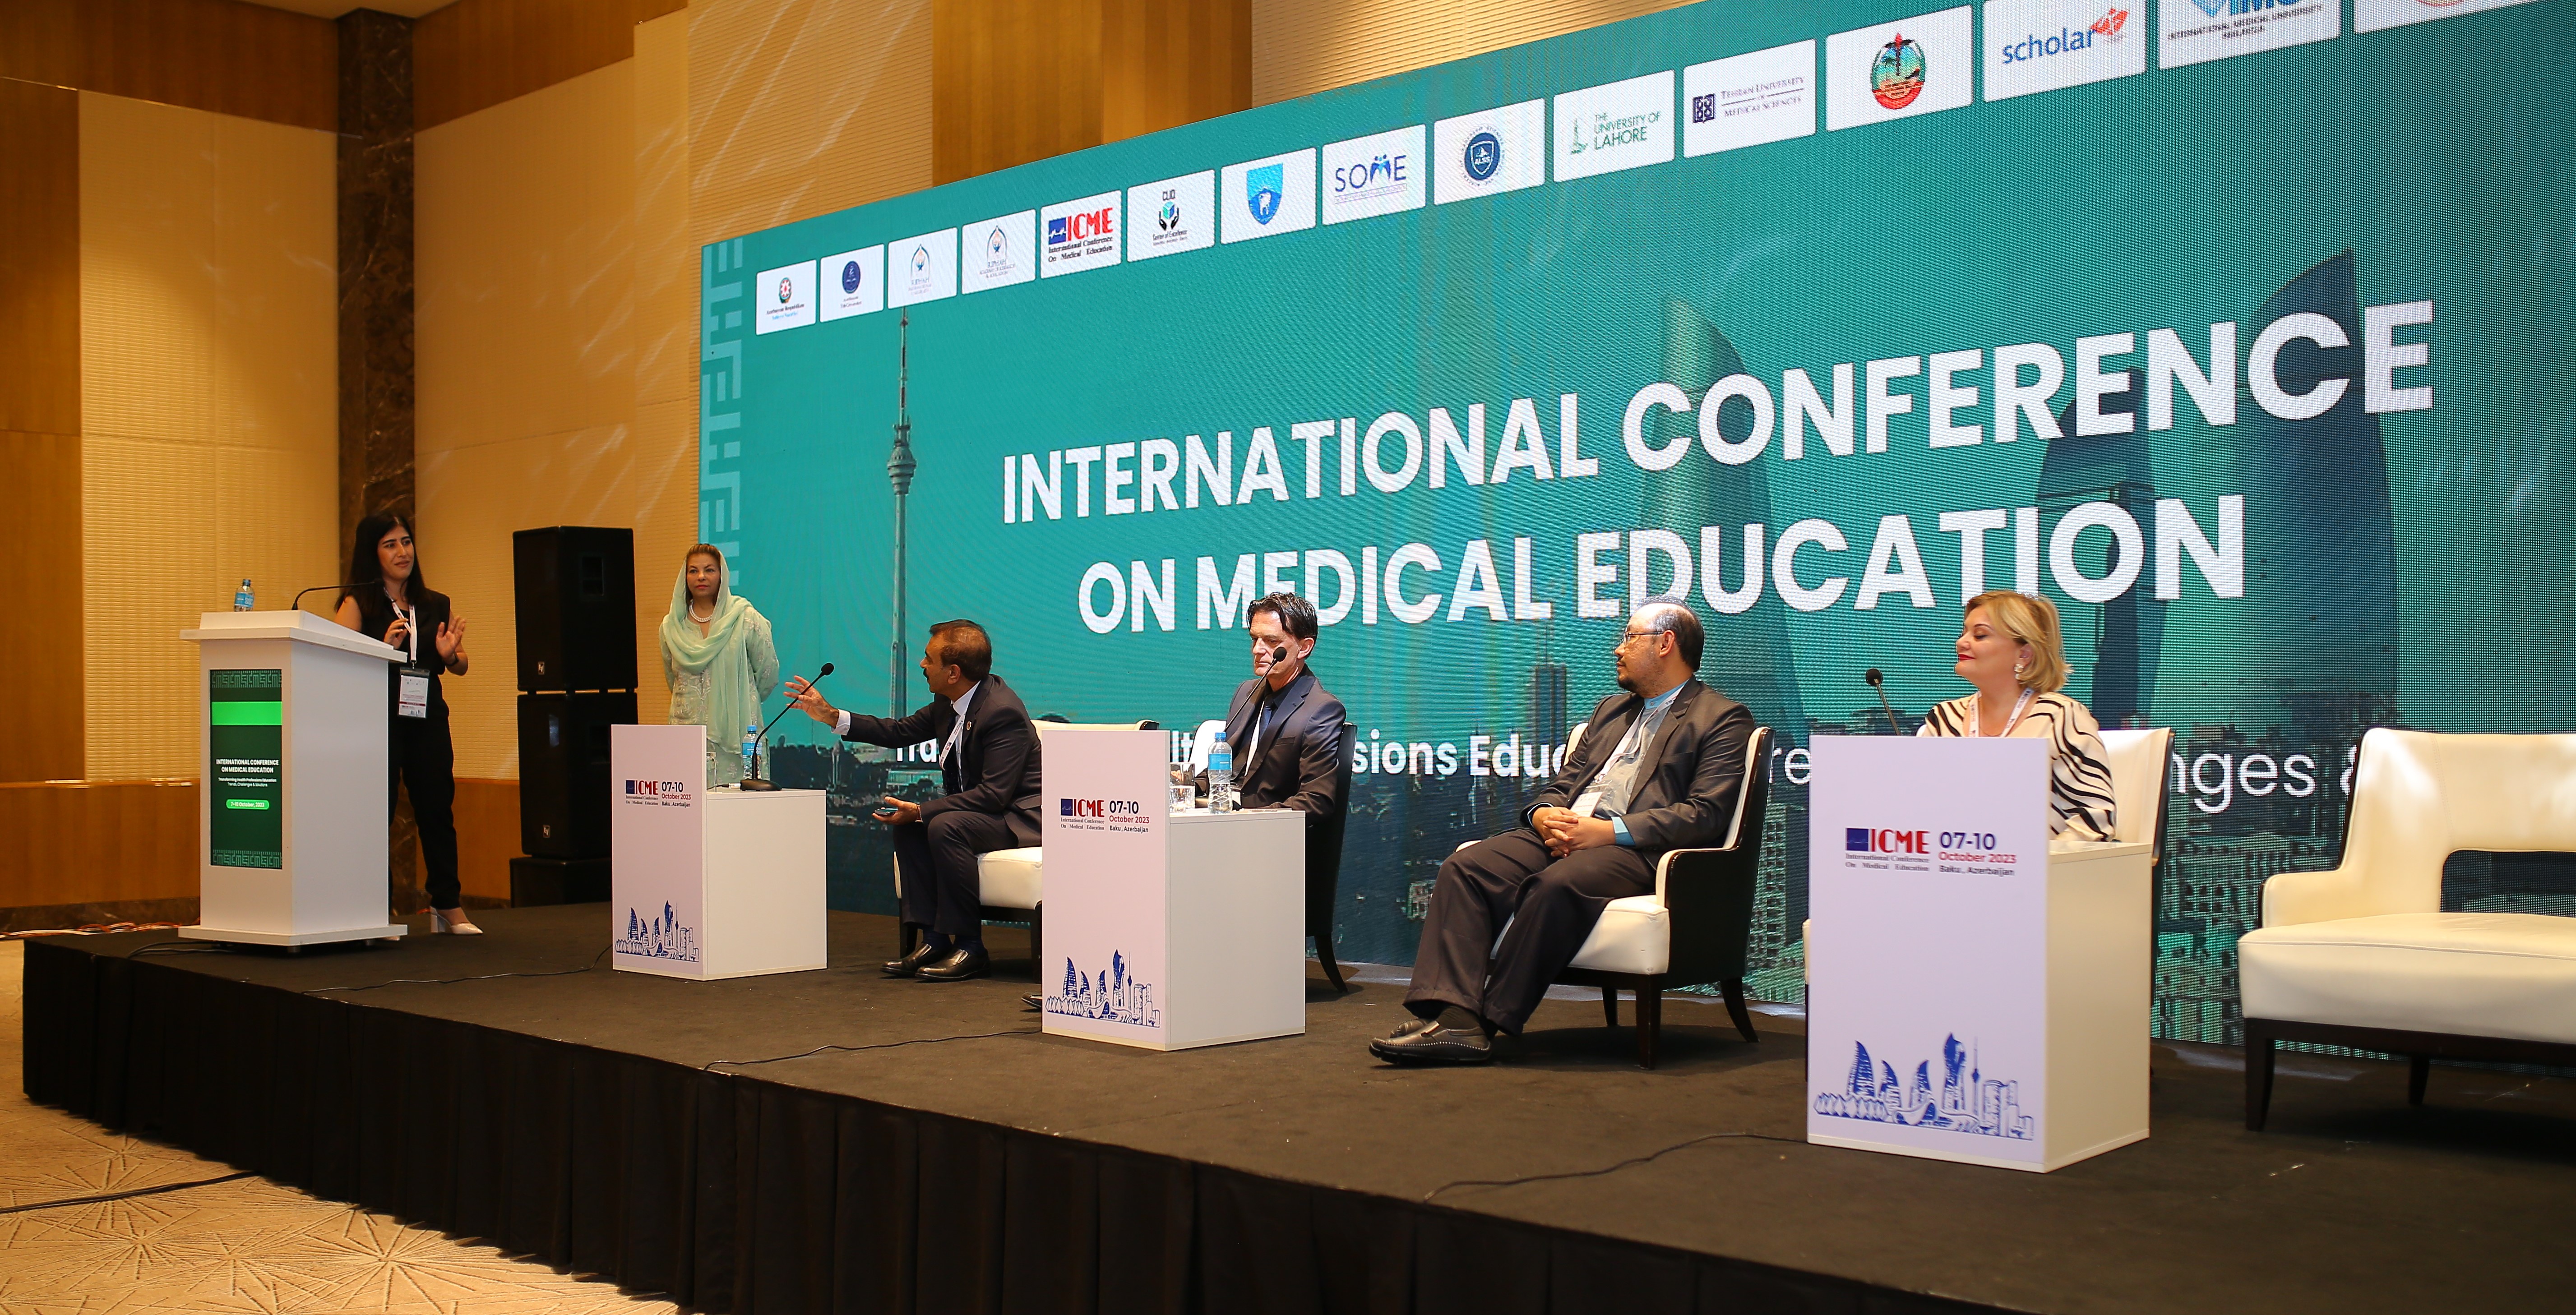 the International Conference on Medical Education